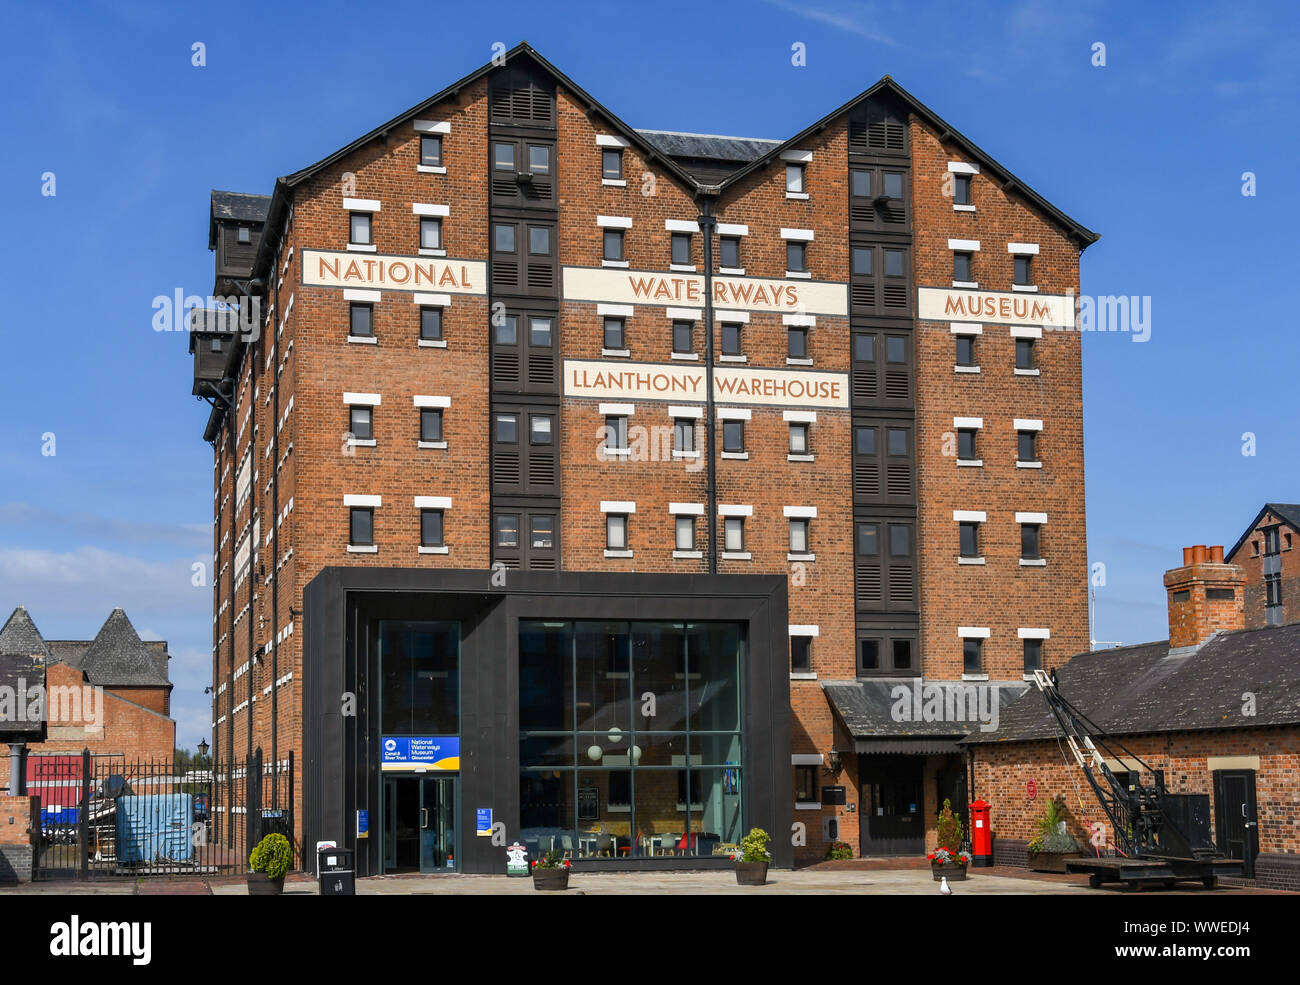 GLOUCESTER QUAYS, ENGLAND - SEPTEMBER 2019: Exterior view of the front of the National Waterways Museum, in the Gloucester Stock Photo